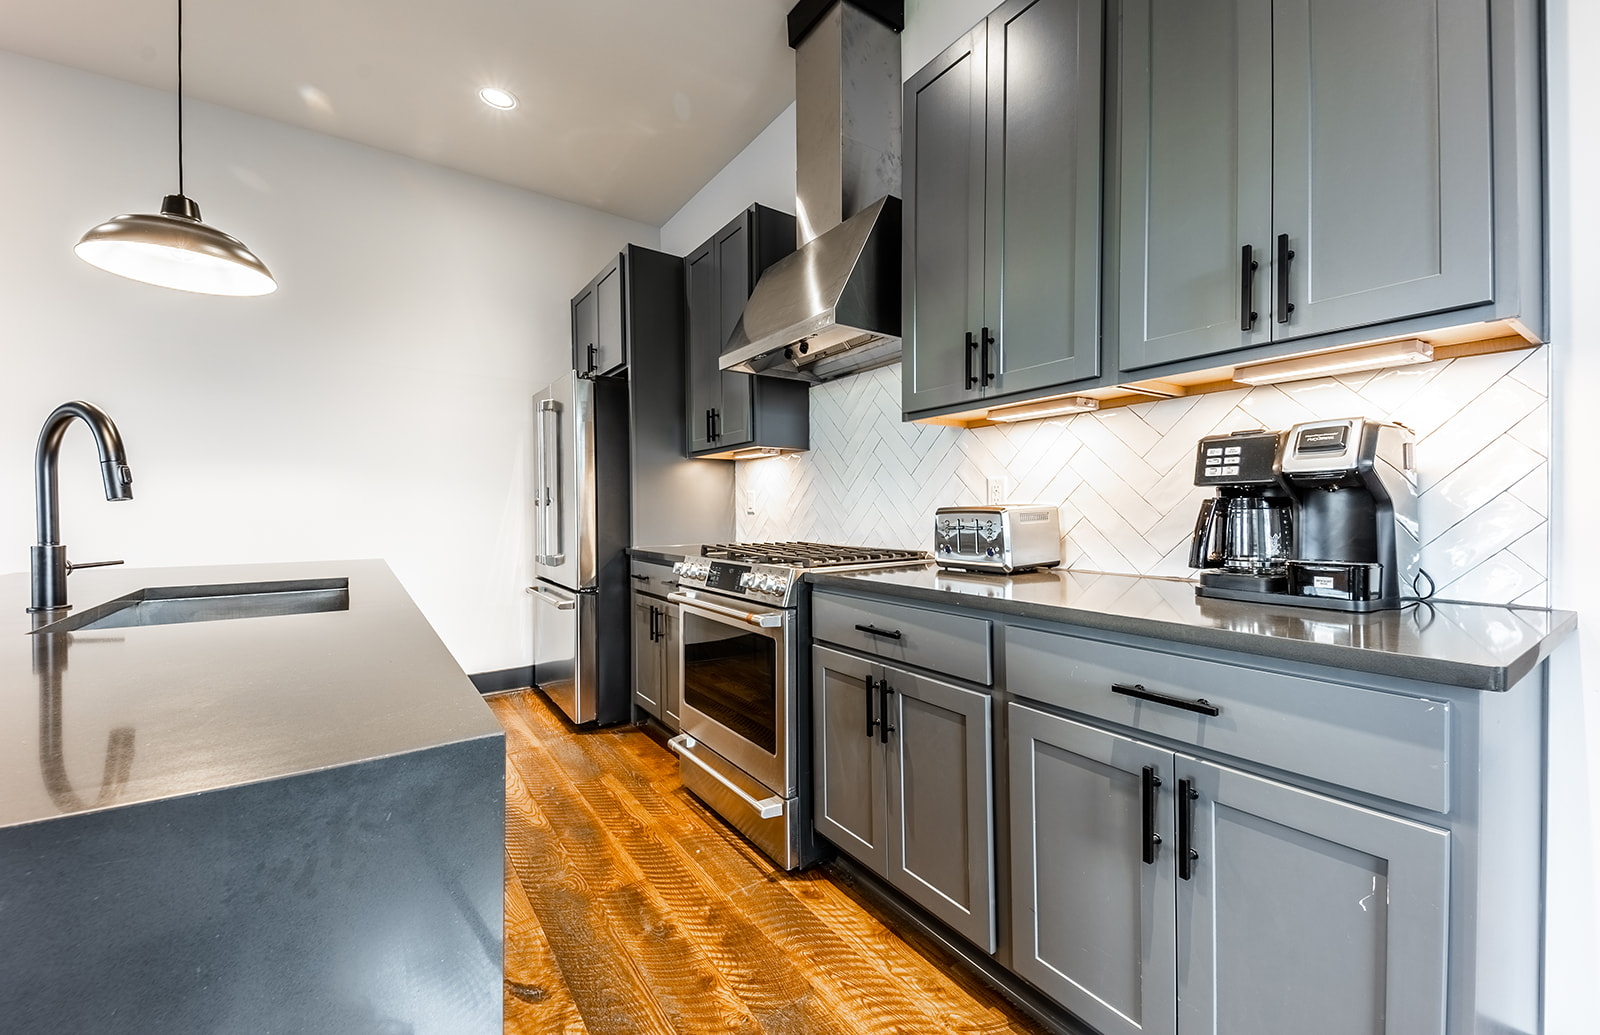 2nd unit: Gourmet style kitchen with stainless steel appliances and breakfast bar seating. Fully stocked with all your basic cooking essentials.